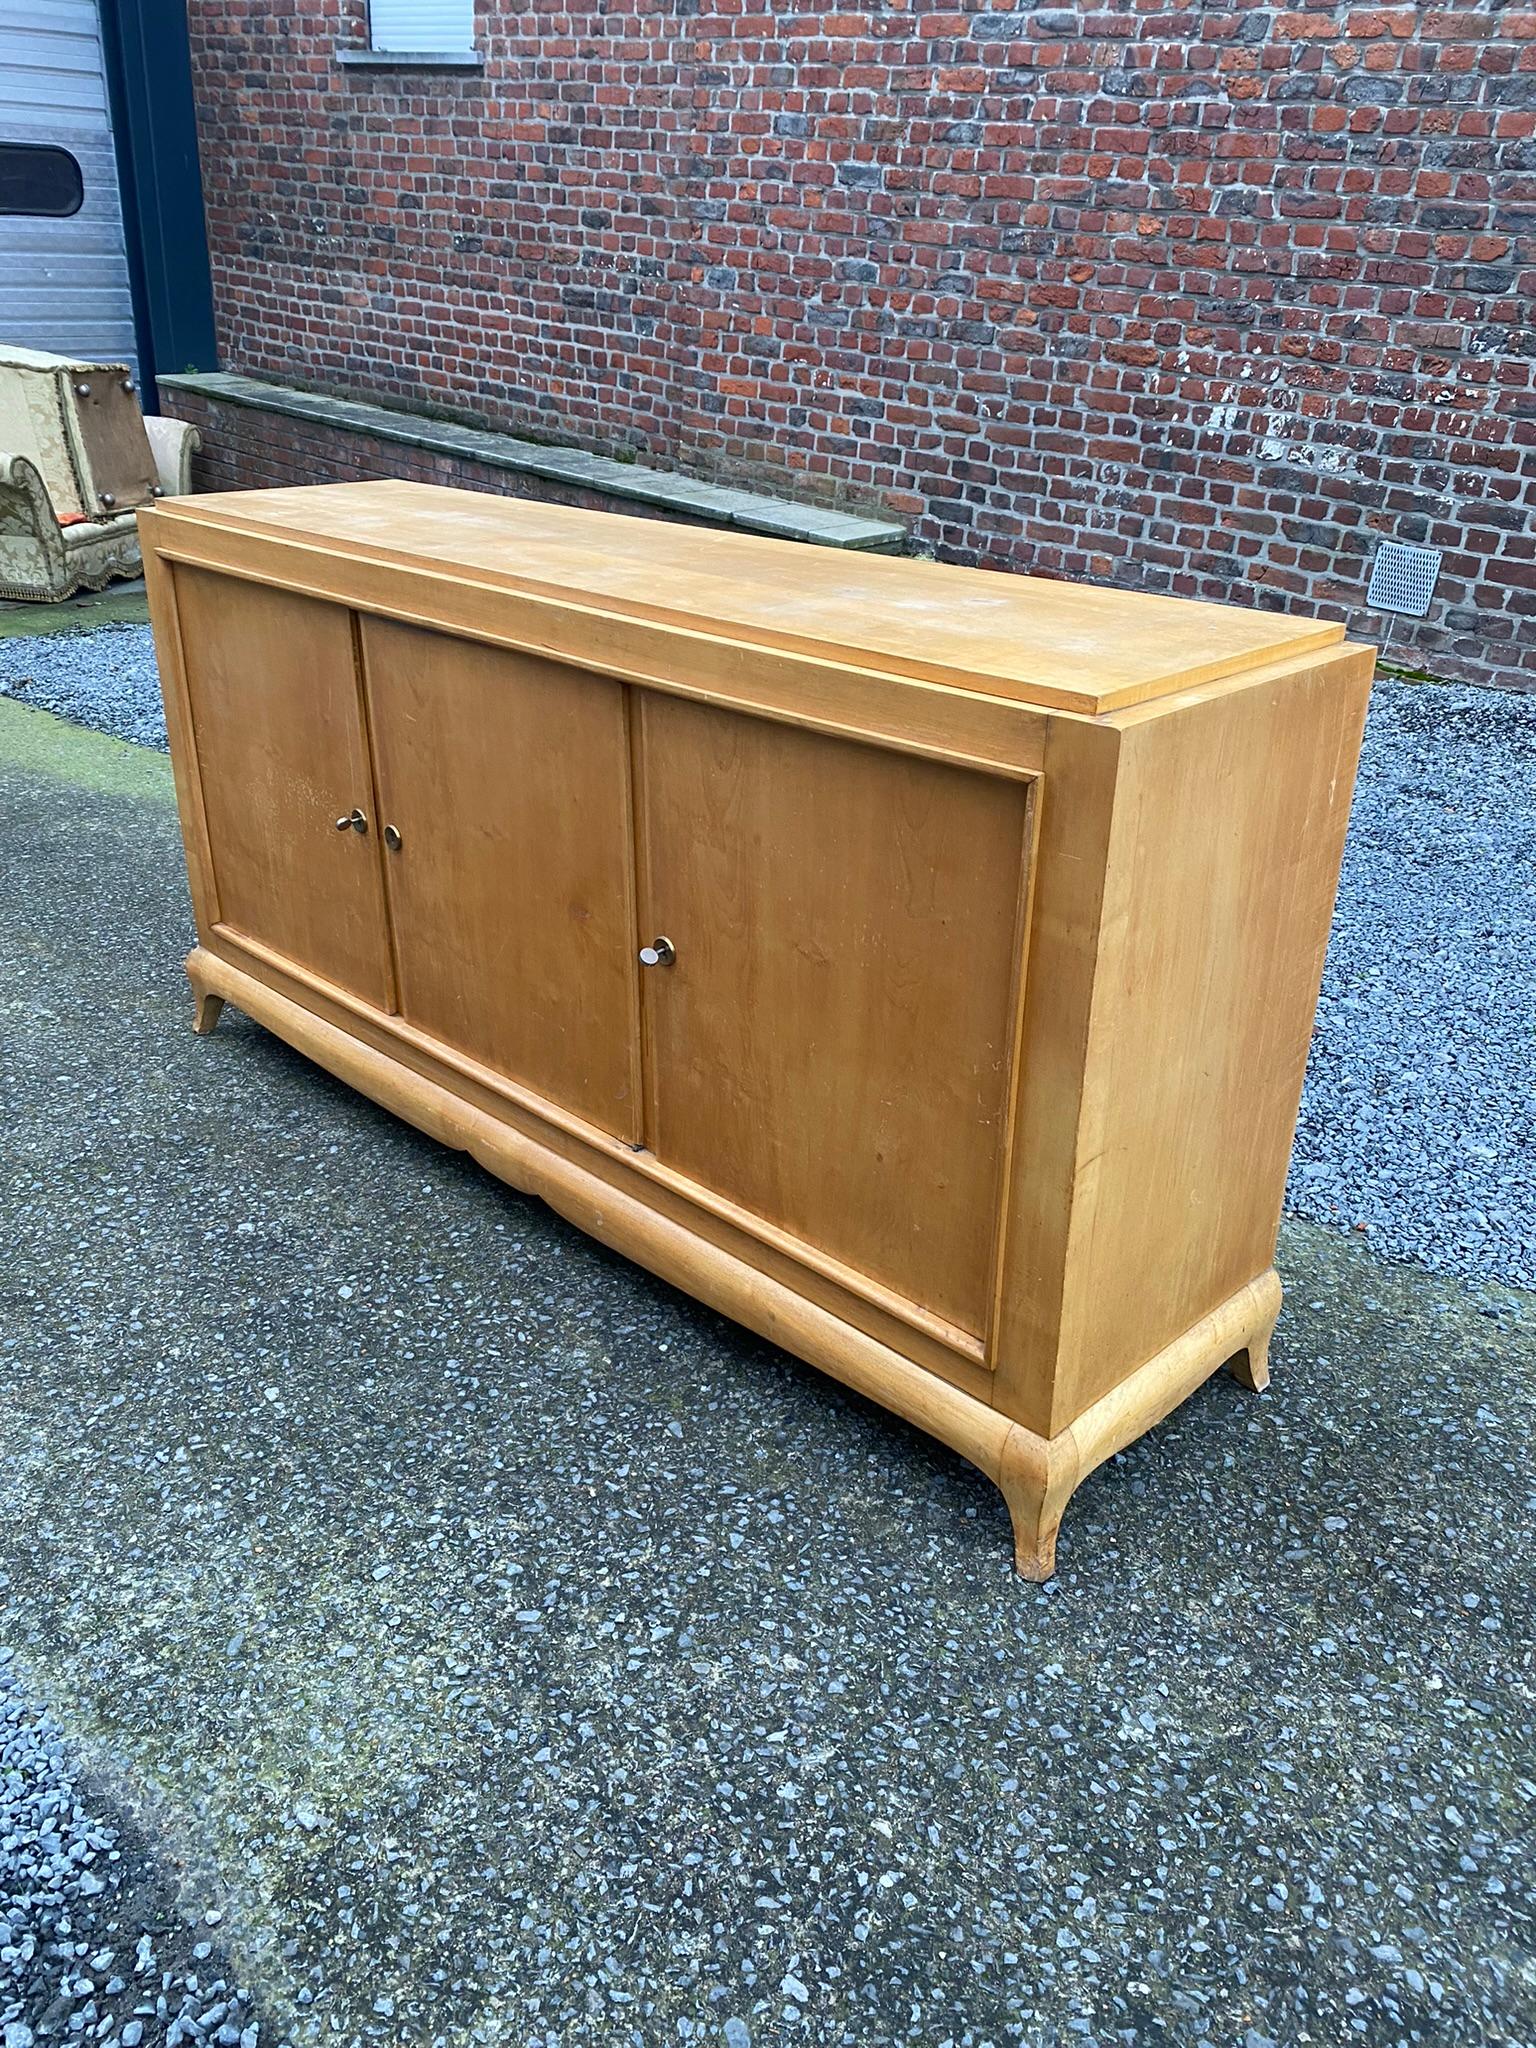 René Prou Art Deco Sideboard in Sycamore Veneer, circa 1930-1940 In Good Condition For Sale In Saint-Ouen, FR